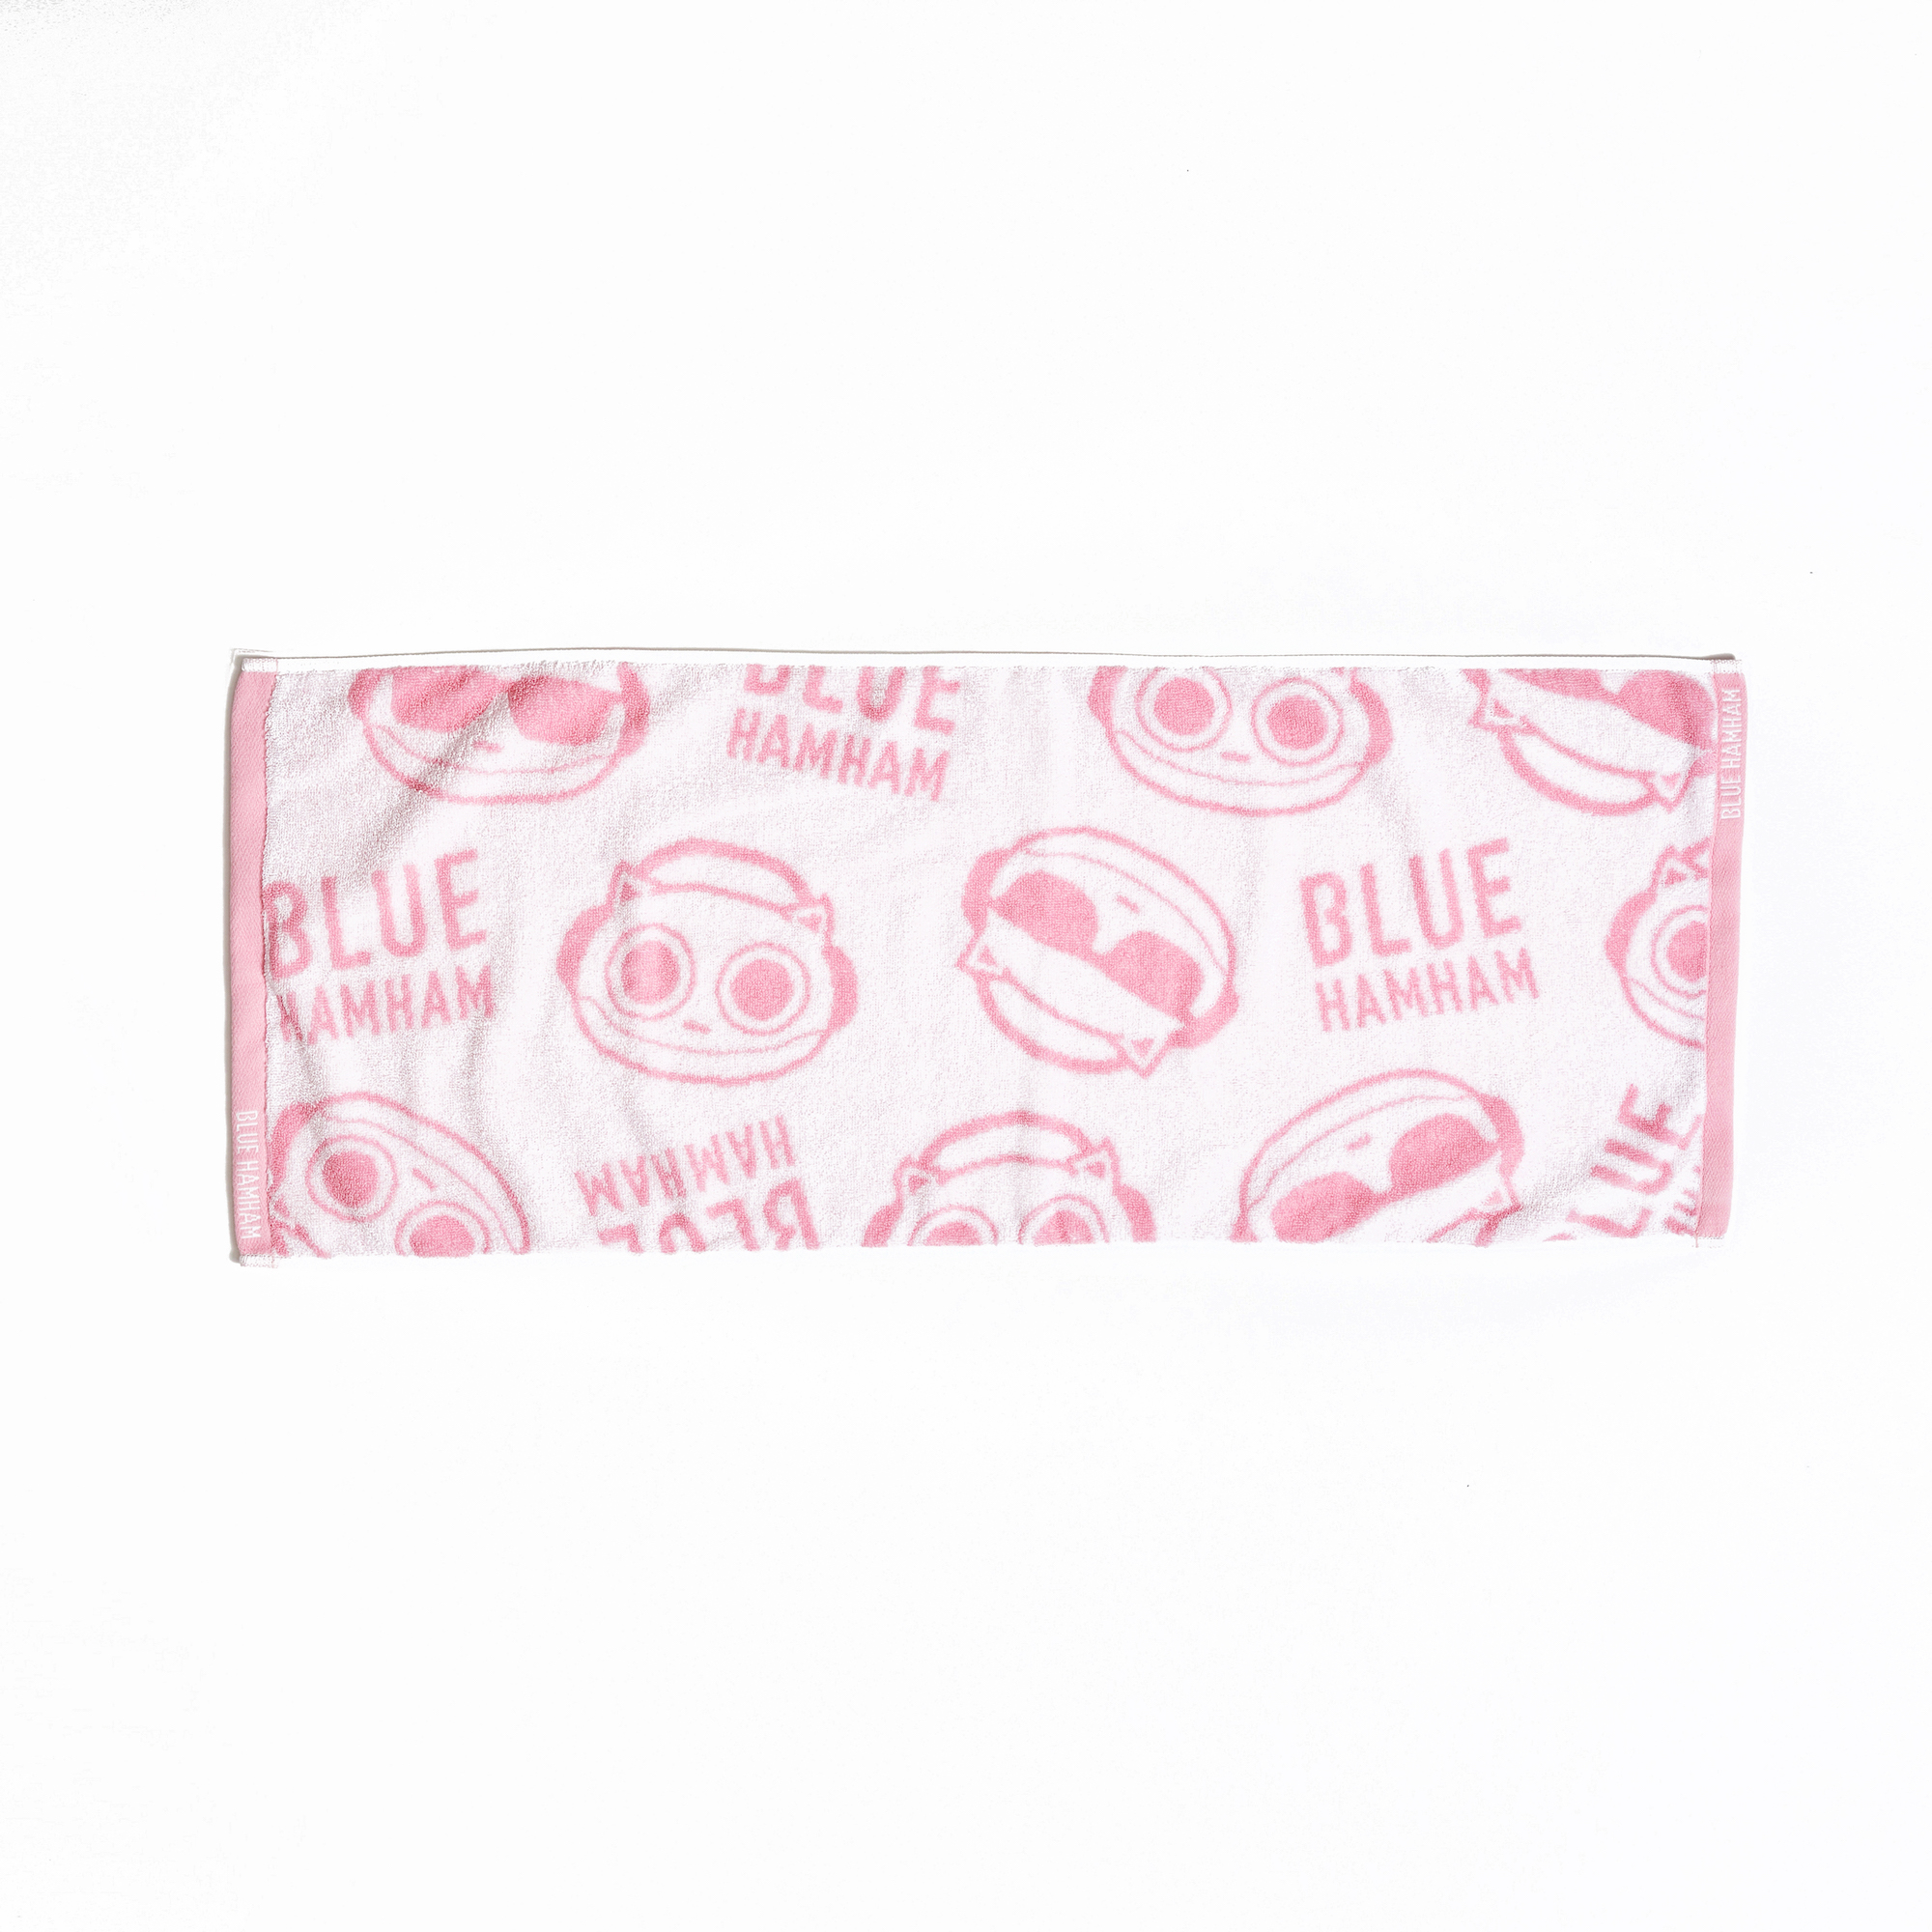 blue-hamham-pop-up-store-pink-collection-8